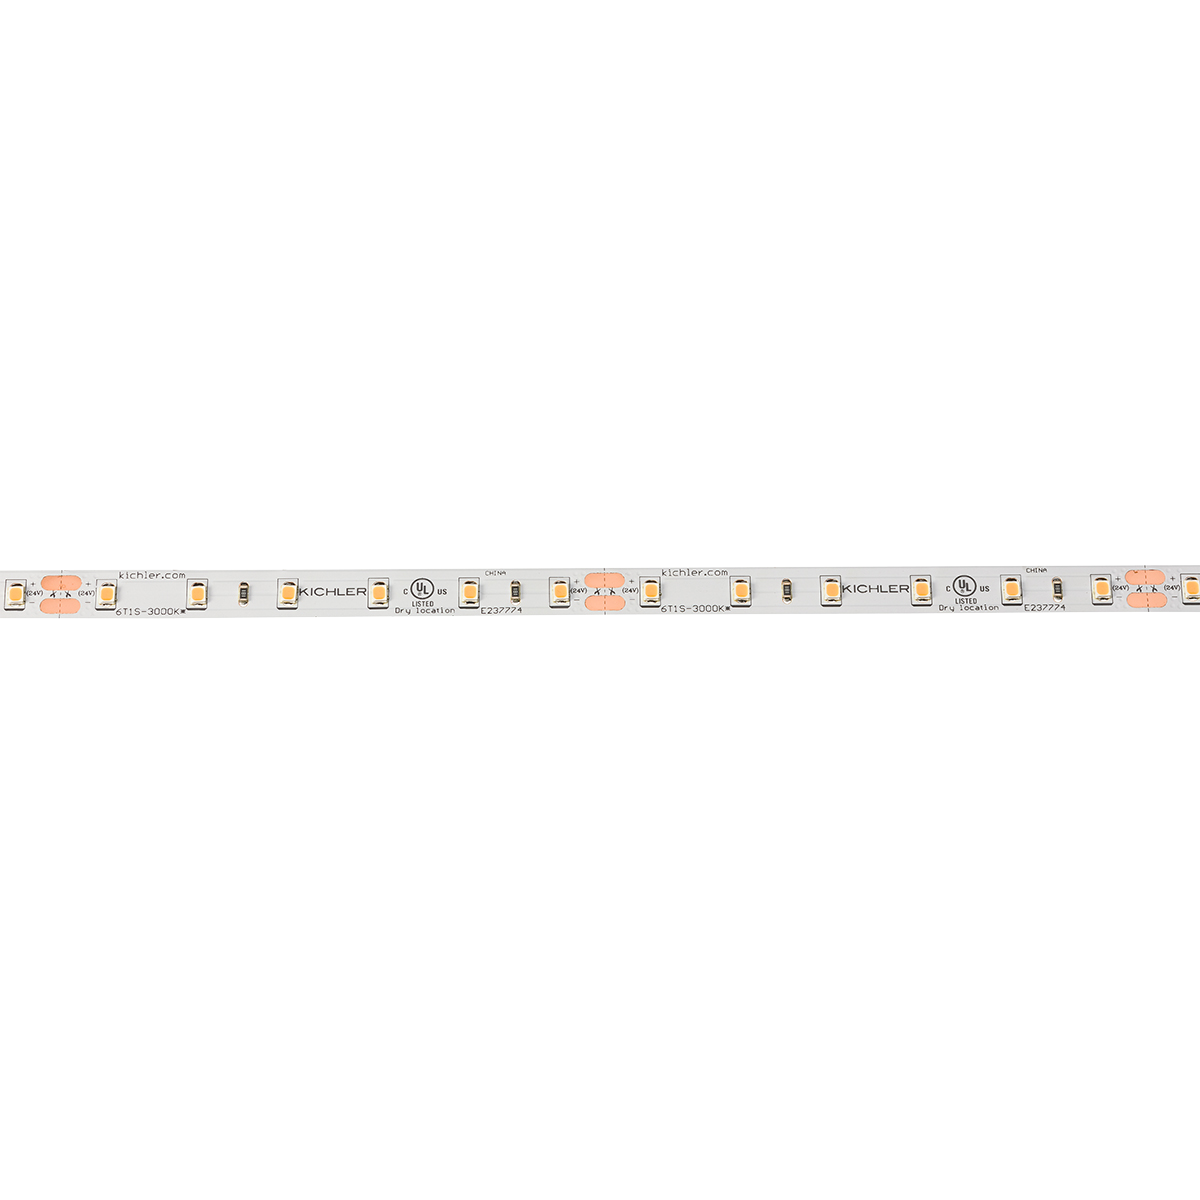 This 24-Volt LED standard output tape light (3000K) is a lighting support basic that features a versatile white finish.